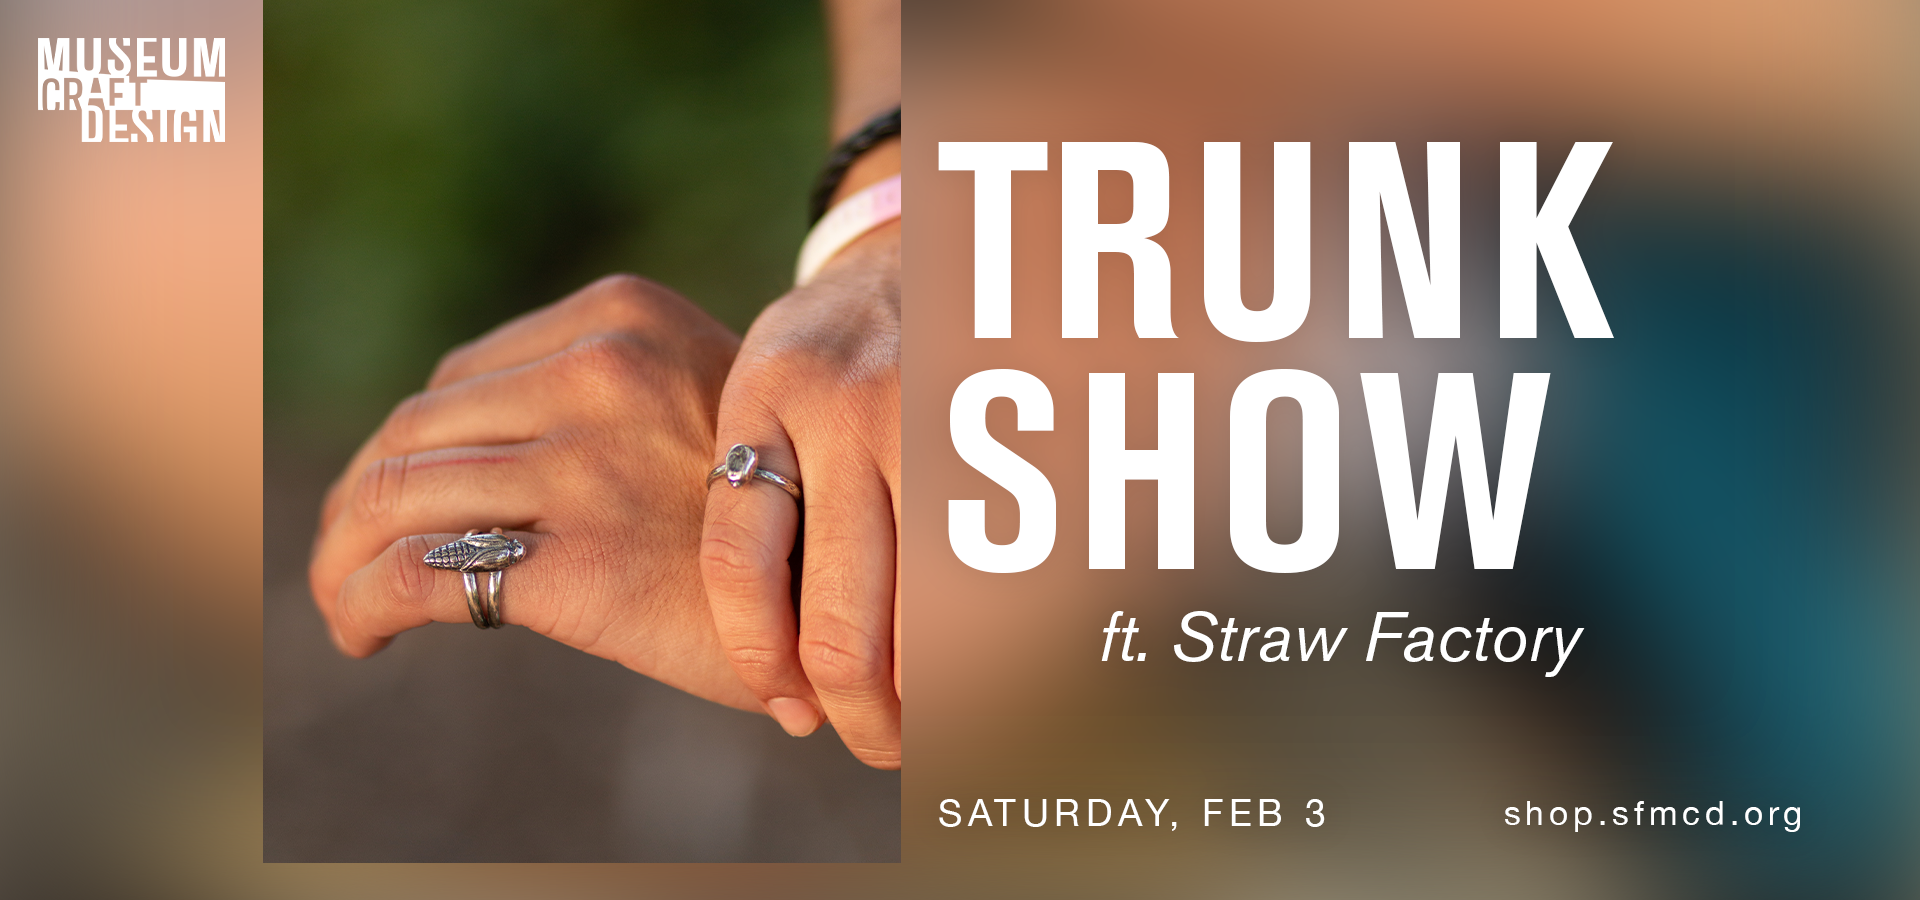 The graphic for MCD's upcoming Trunk Show with Straw Factory